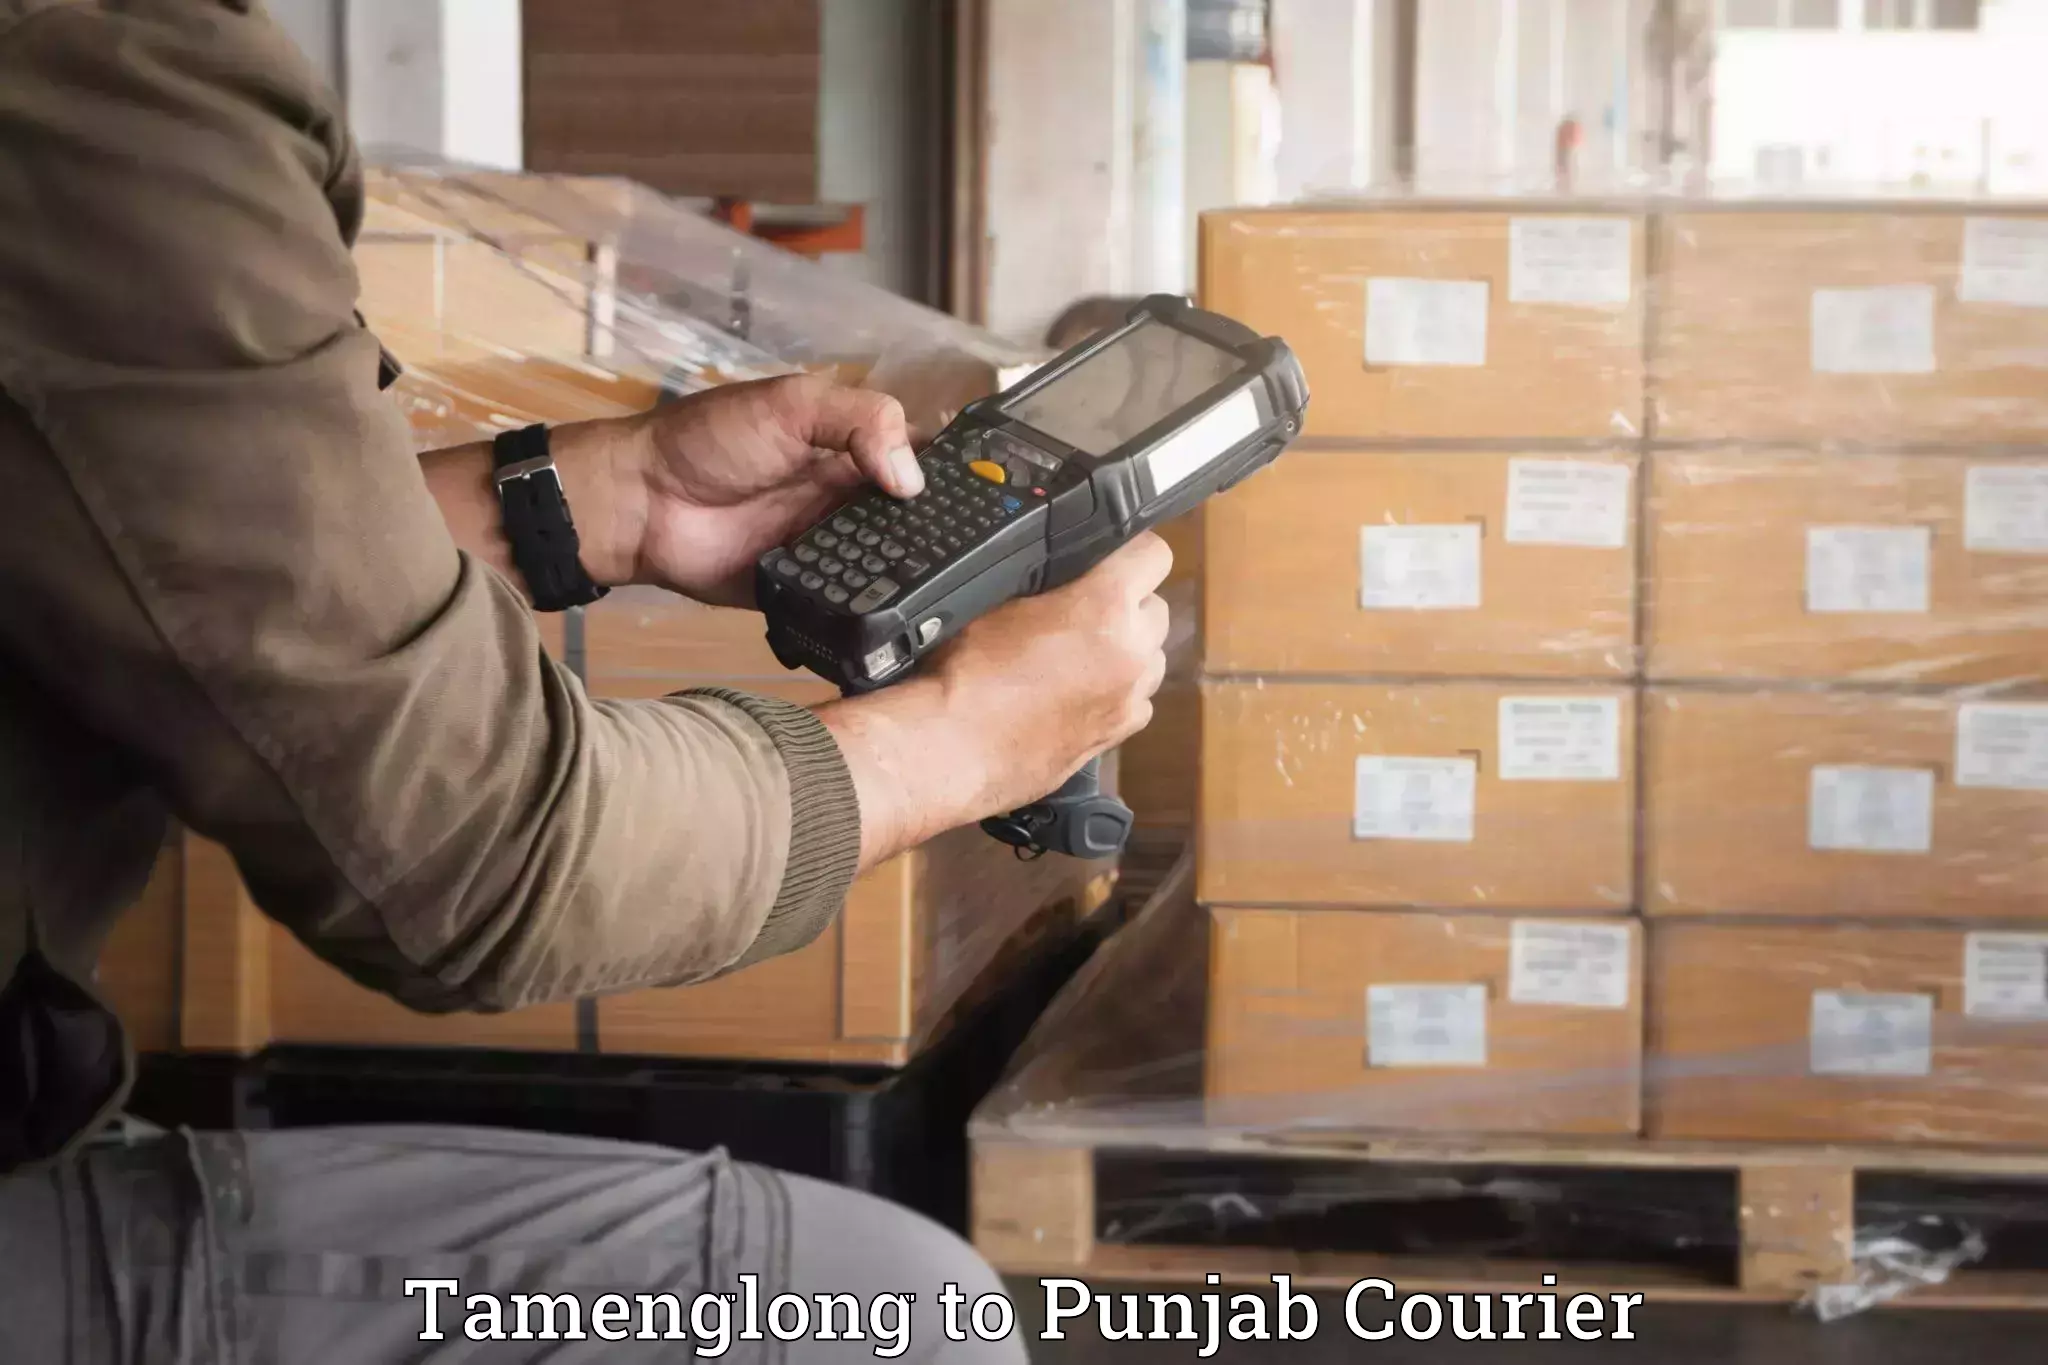 Baggage transport technology Tamenglong to Sirhind Fatehgarh